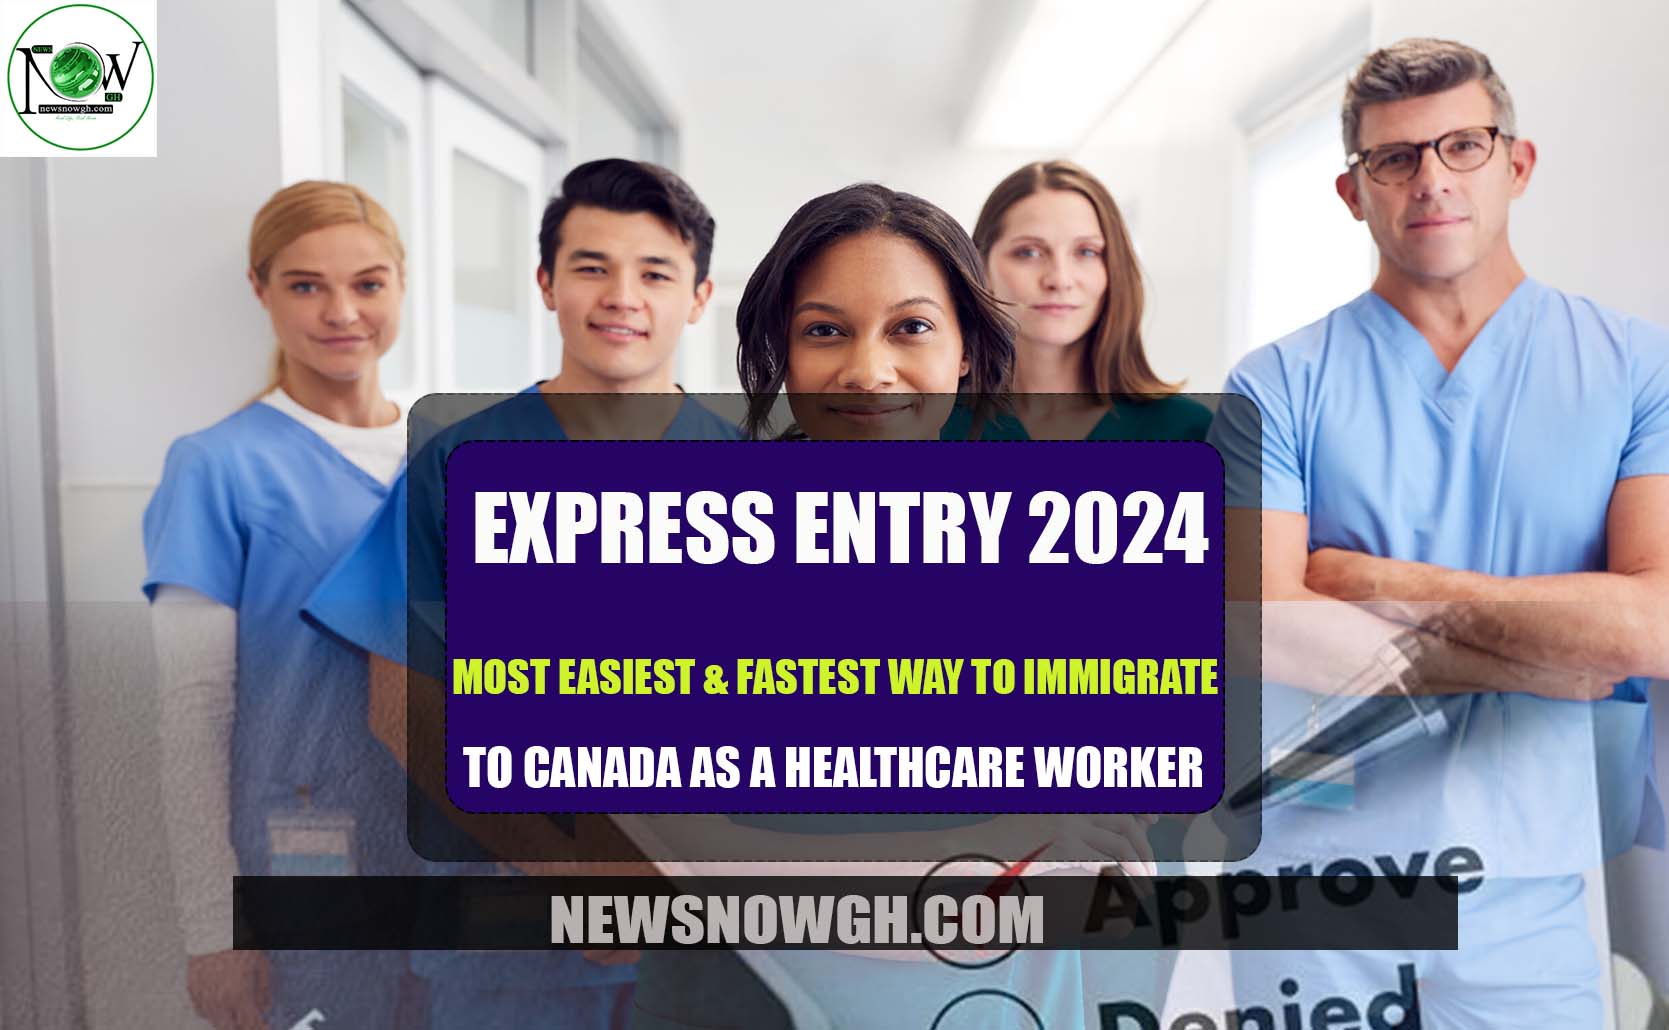 Immigrate to Canada as a Healthcare Worker Express Entry 2024